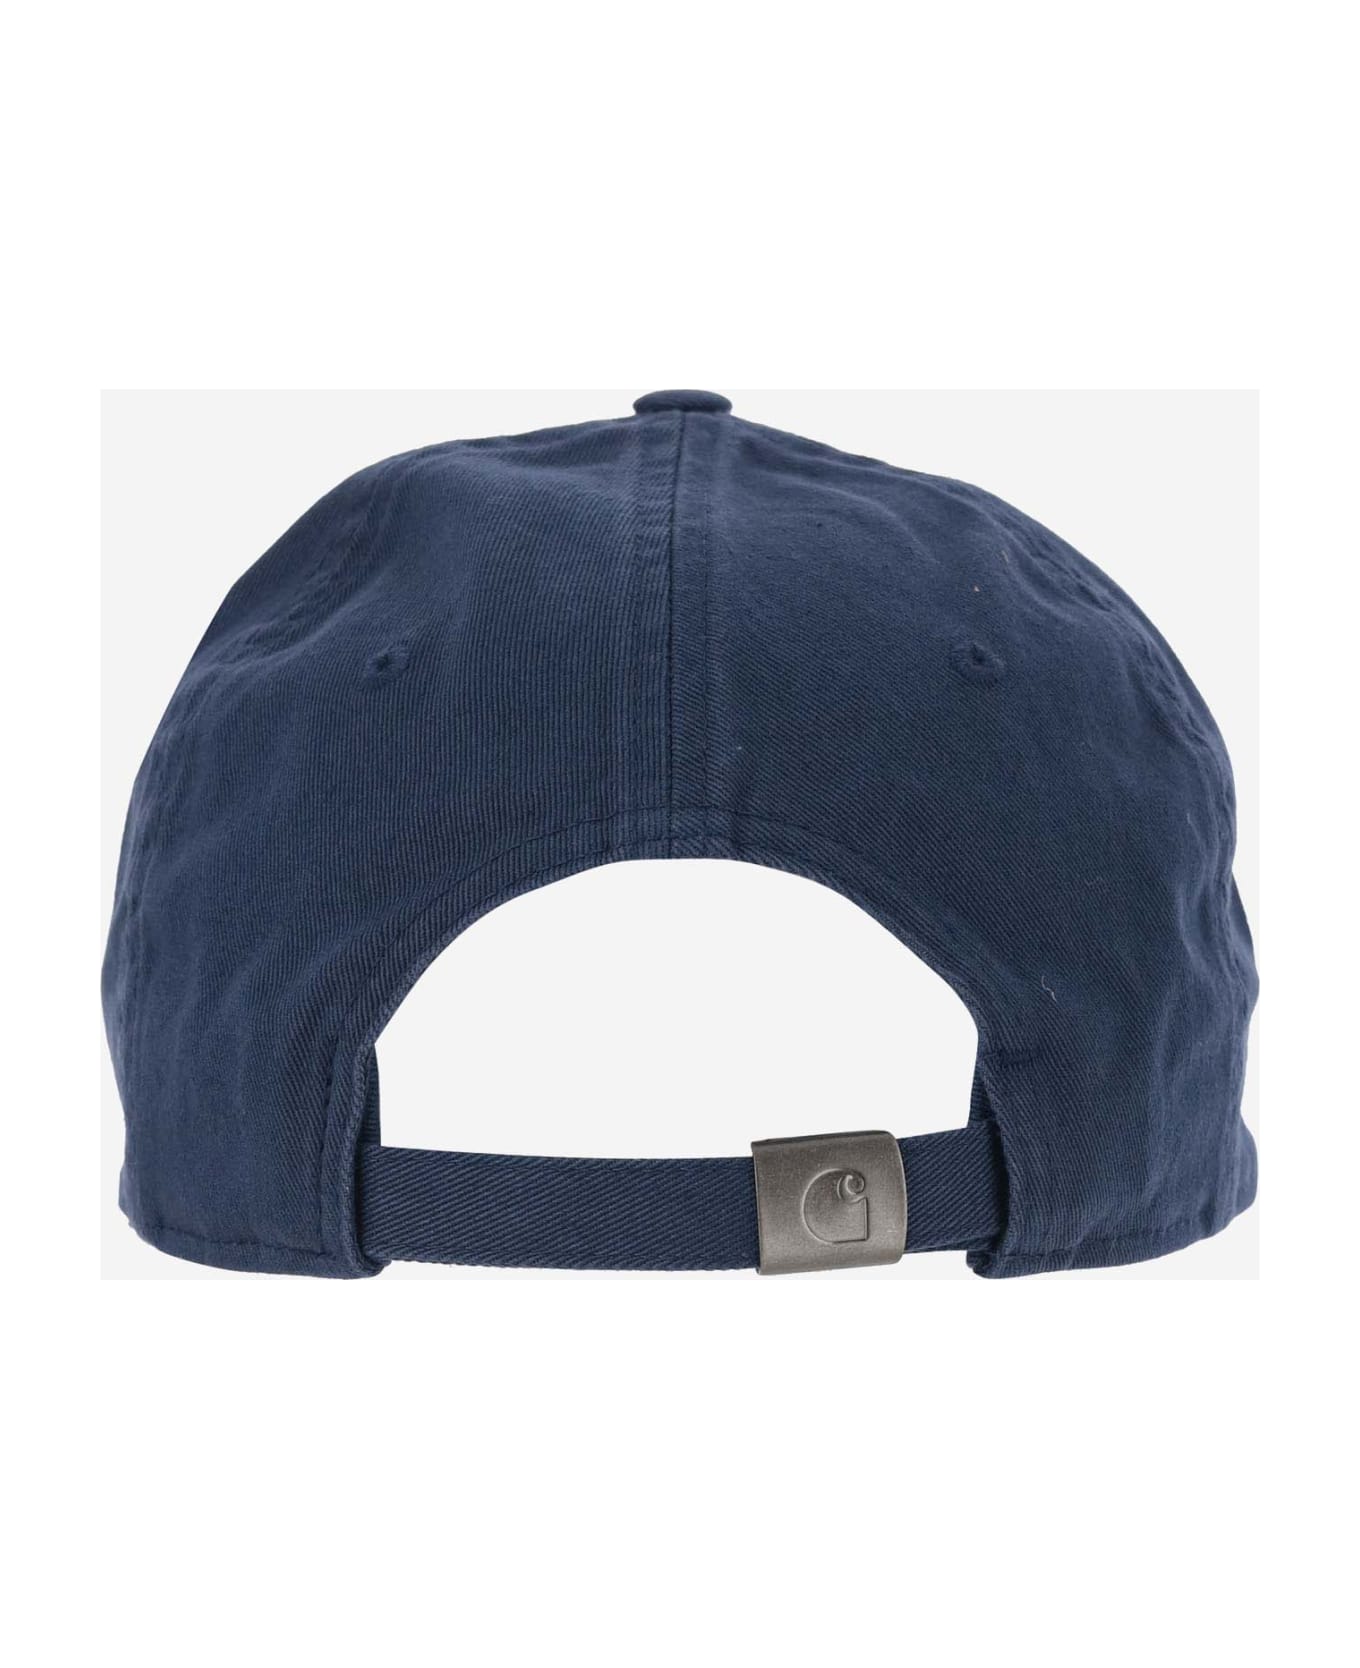 Carhartt Canvas Hat With Logo - Blue